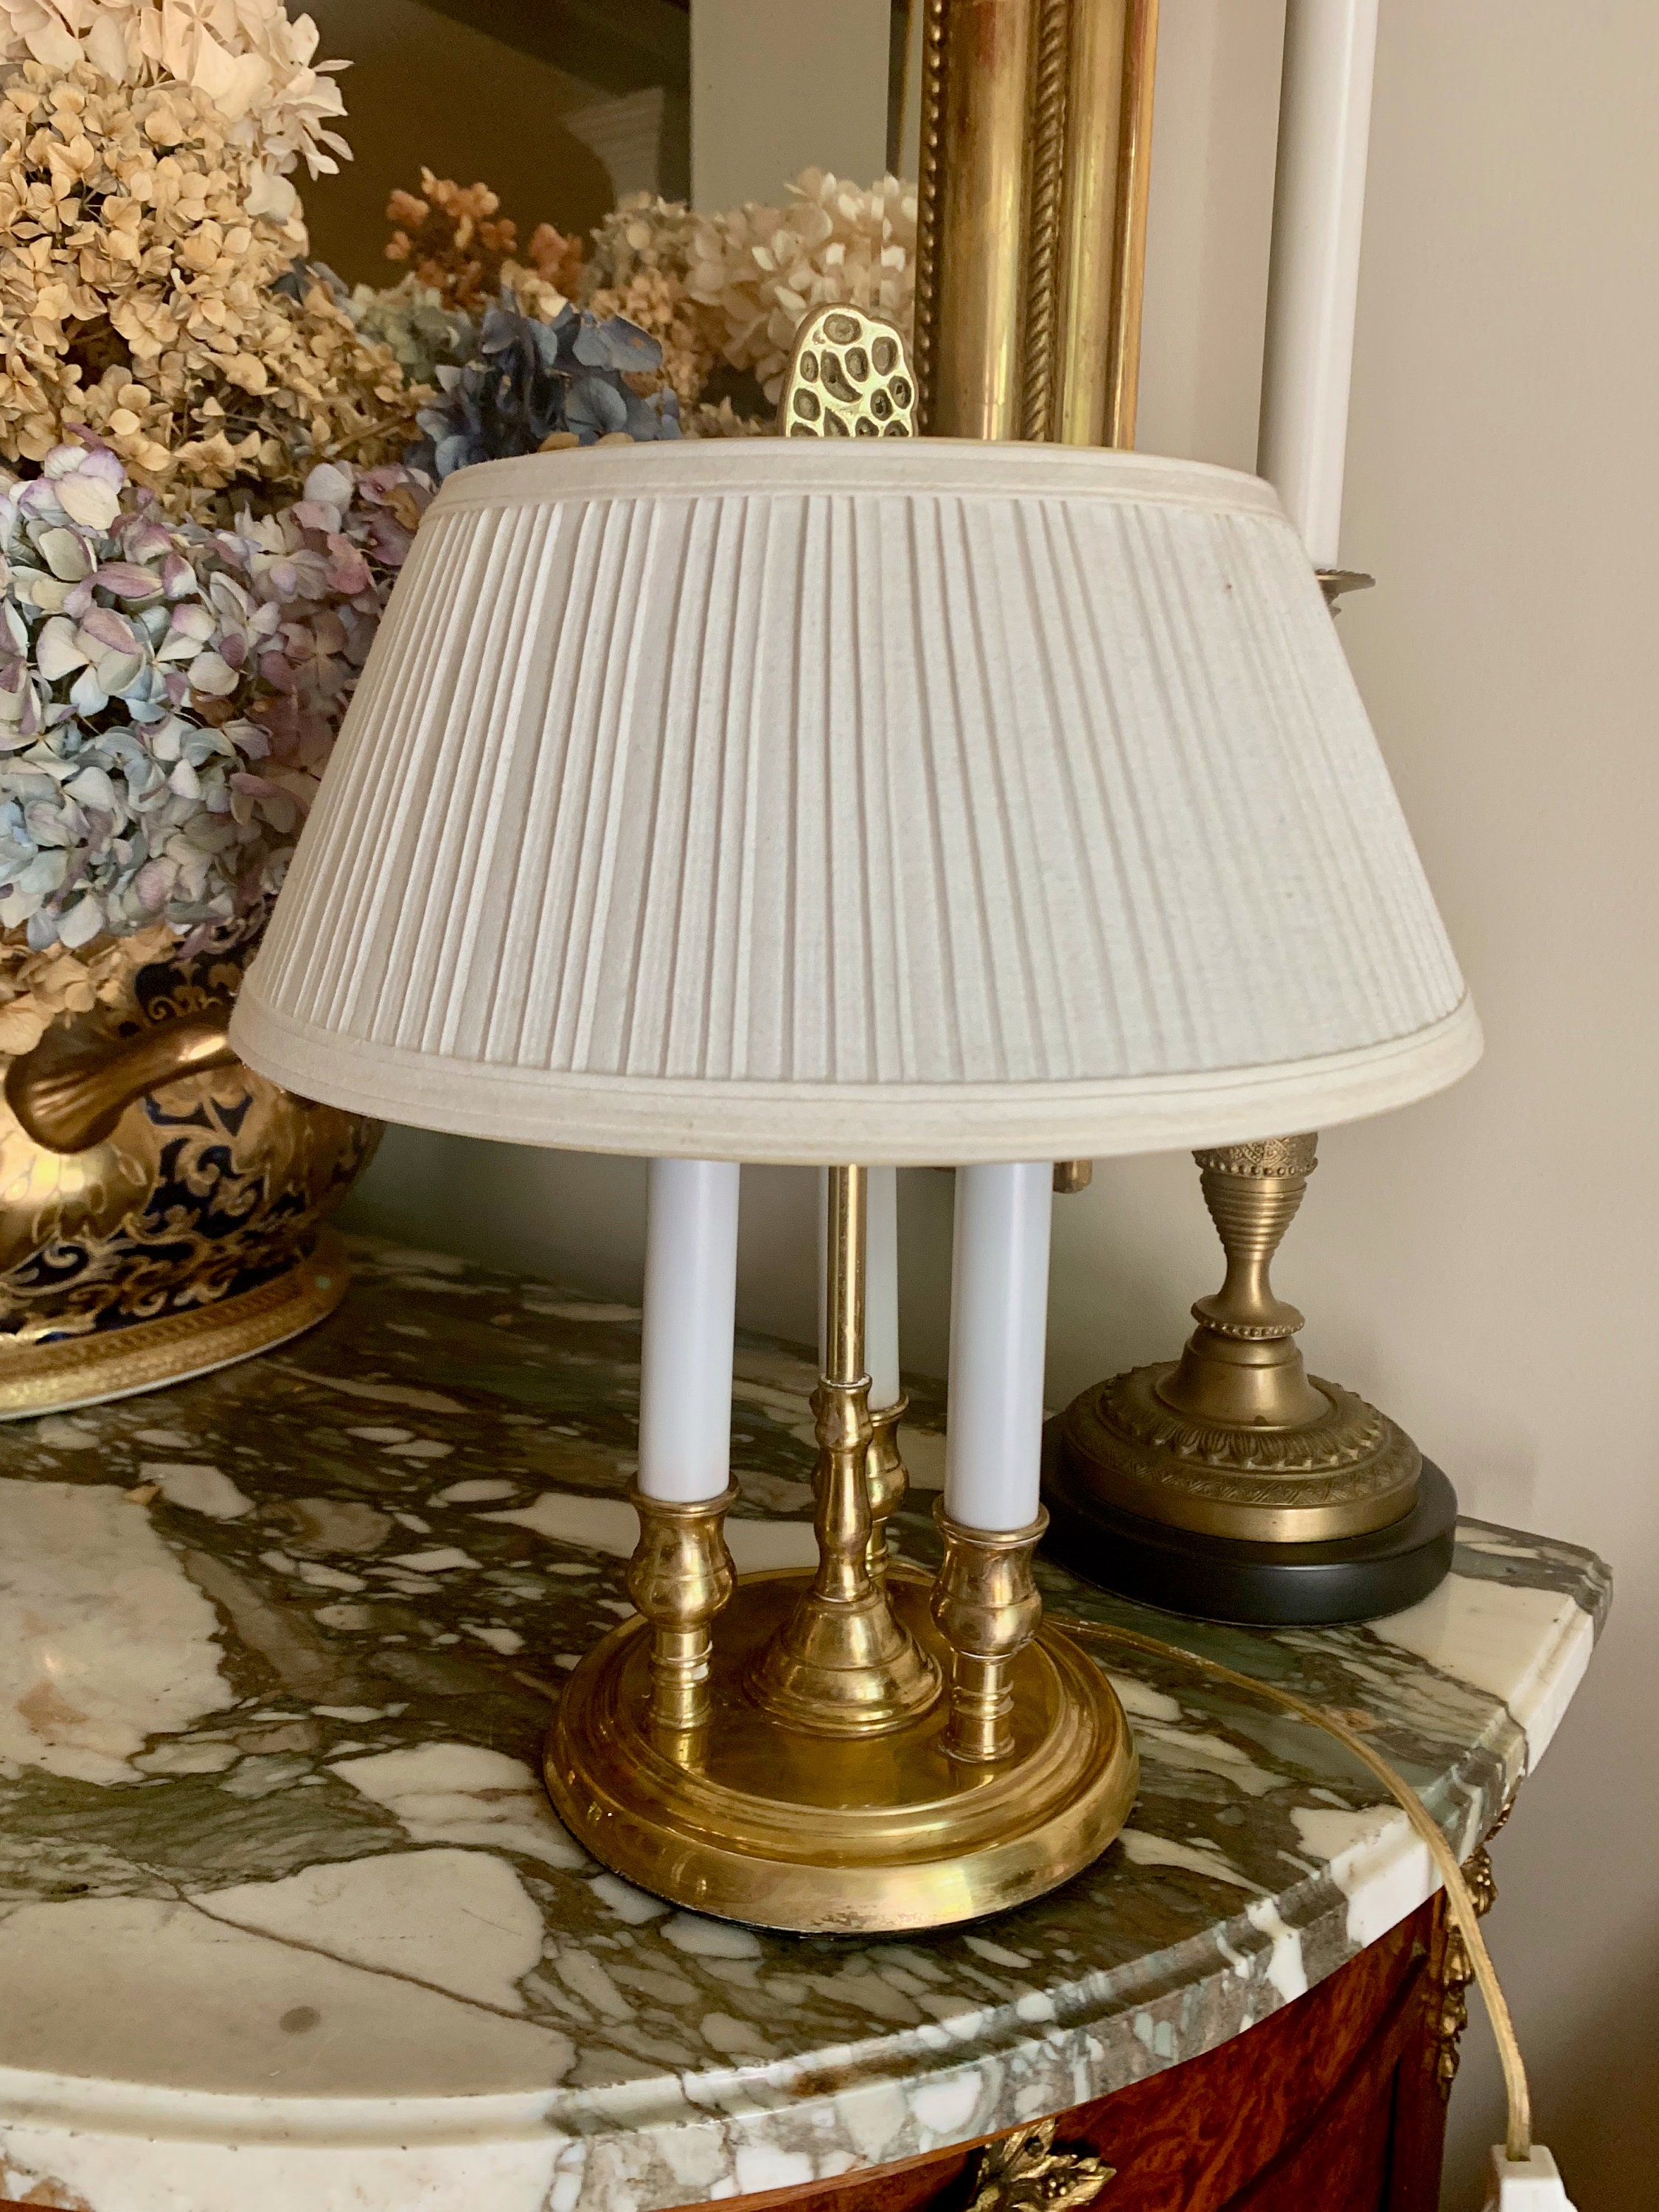 Brass Bouillotte Lamp, Small Brass Bouillotte Style Lamp with Shade, 3  Candle Sockets, Brass Finial, English Country, Colonial Decor